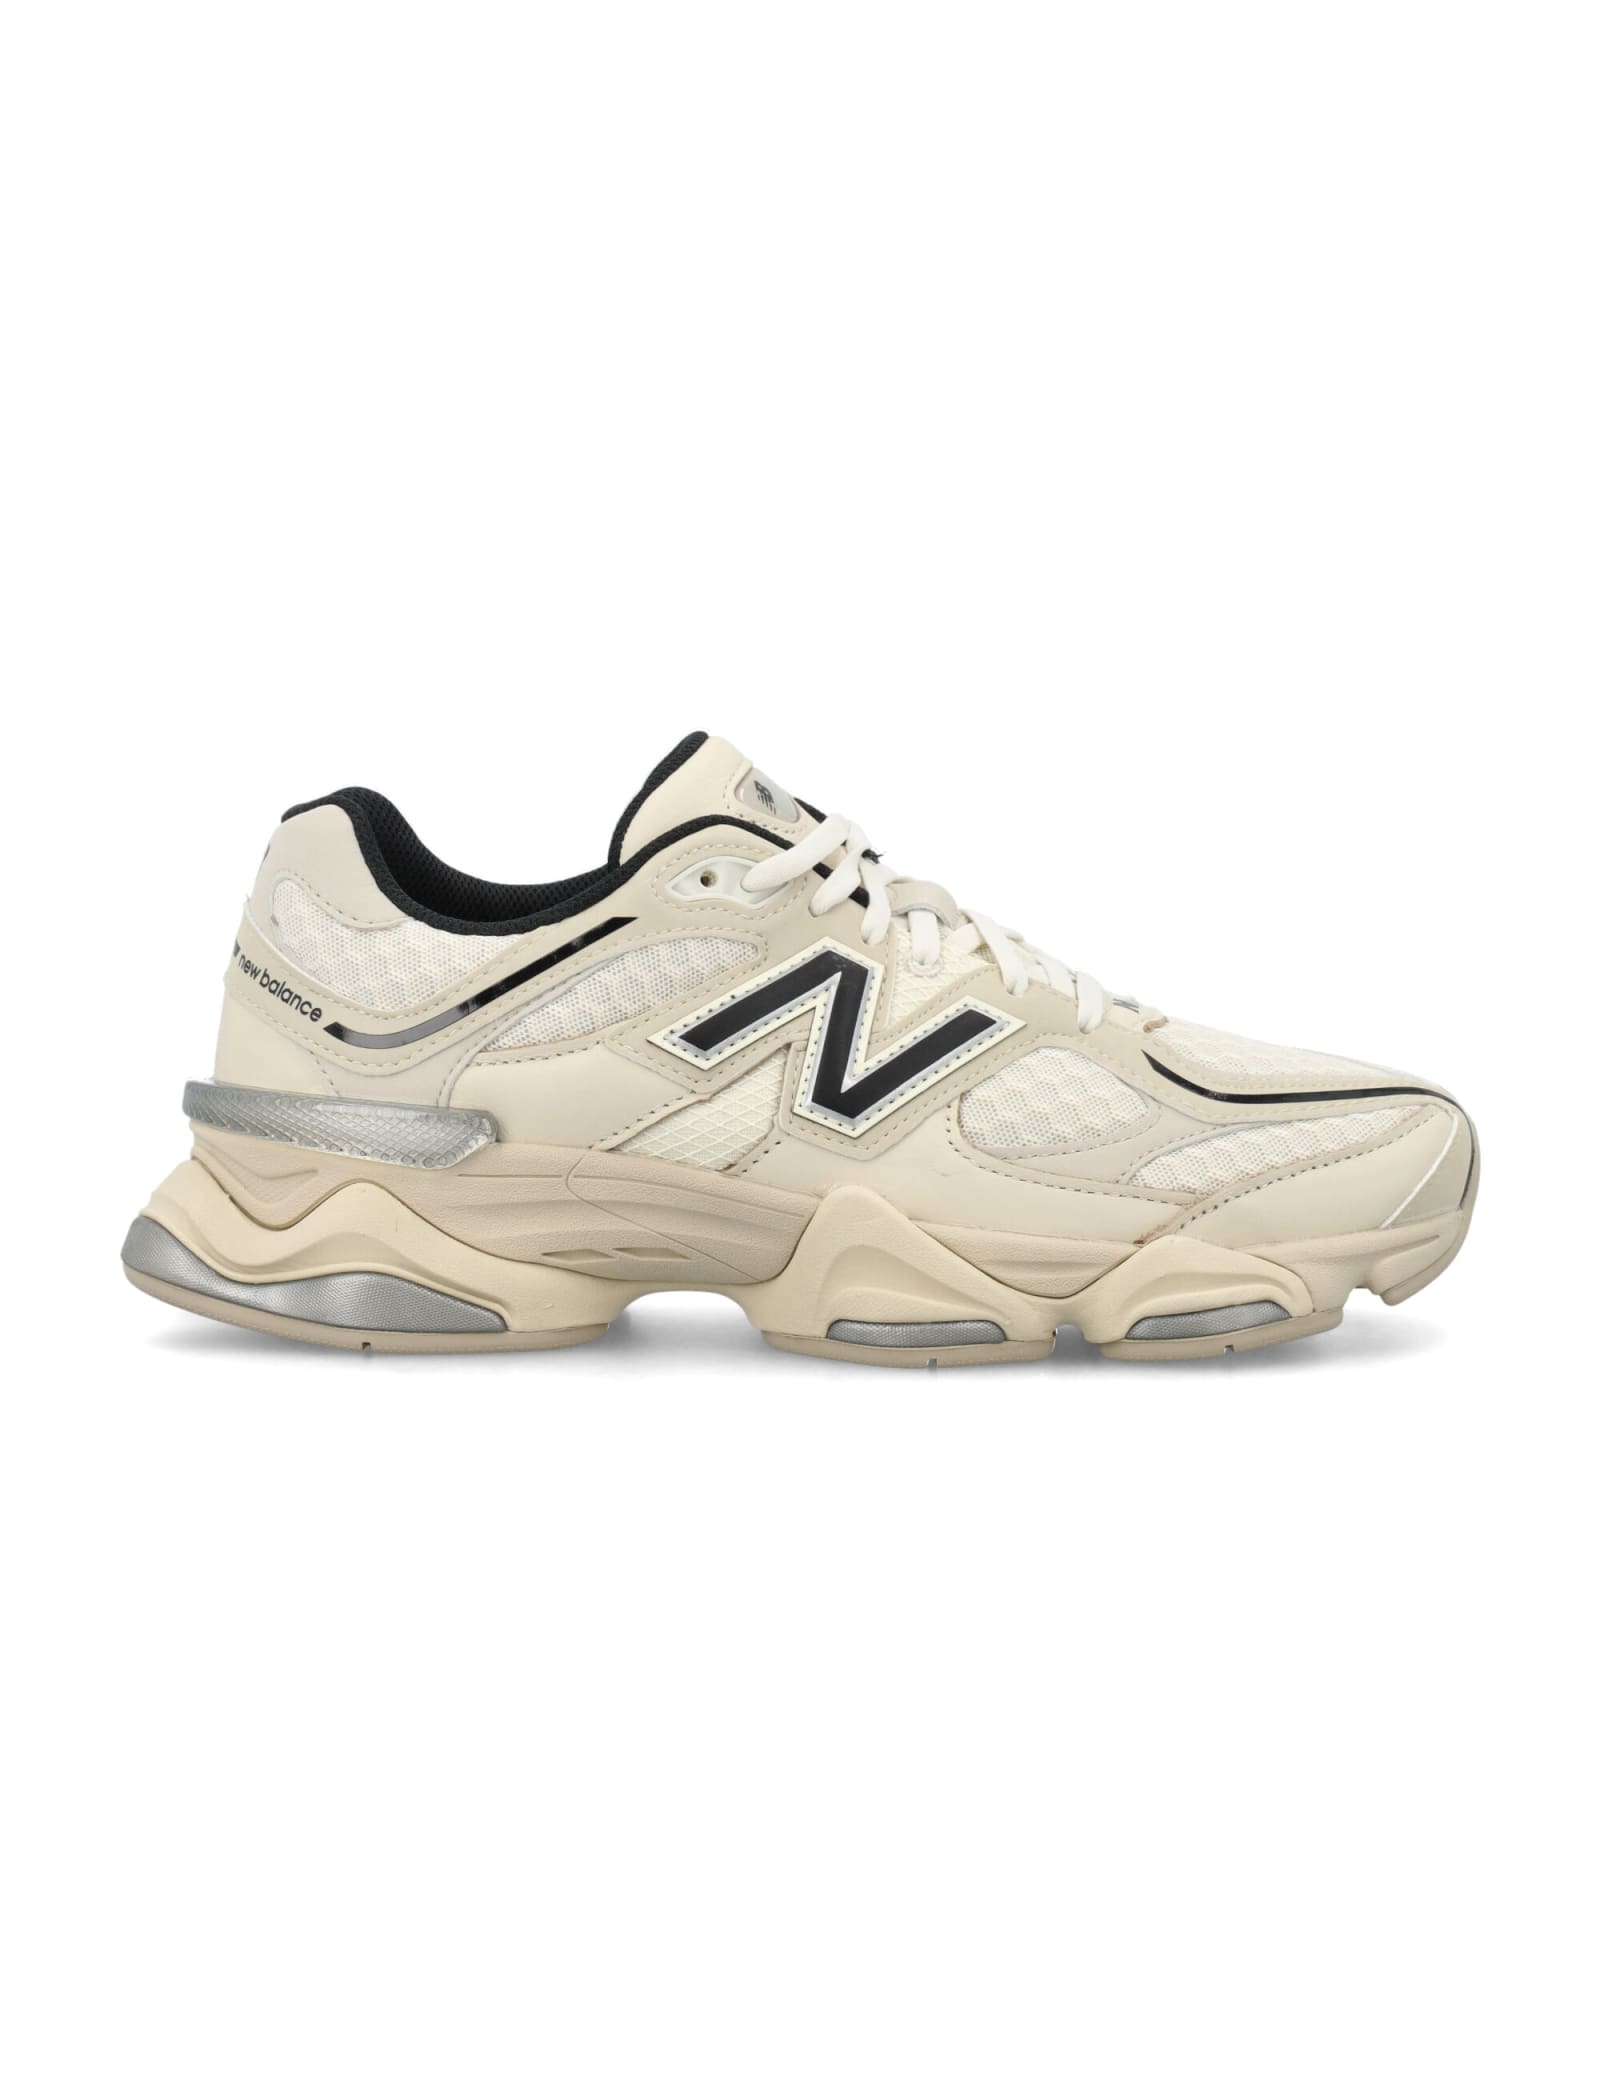 NEW BALANCE 9060 UTILITY SNEAKERS